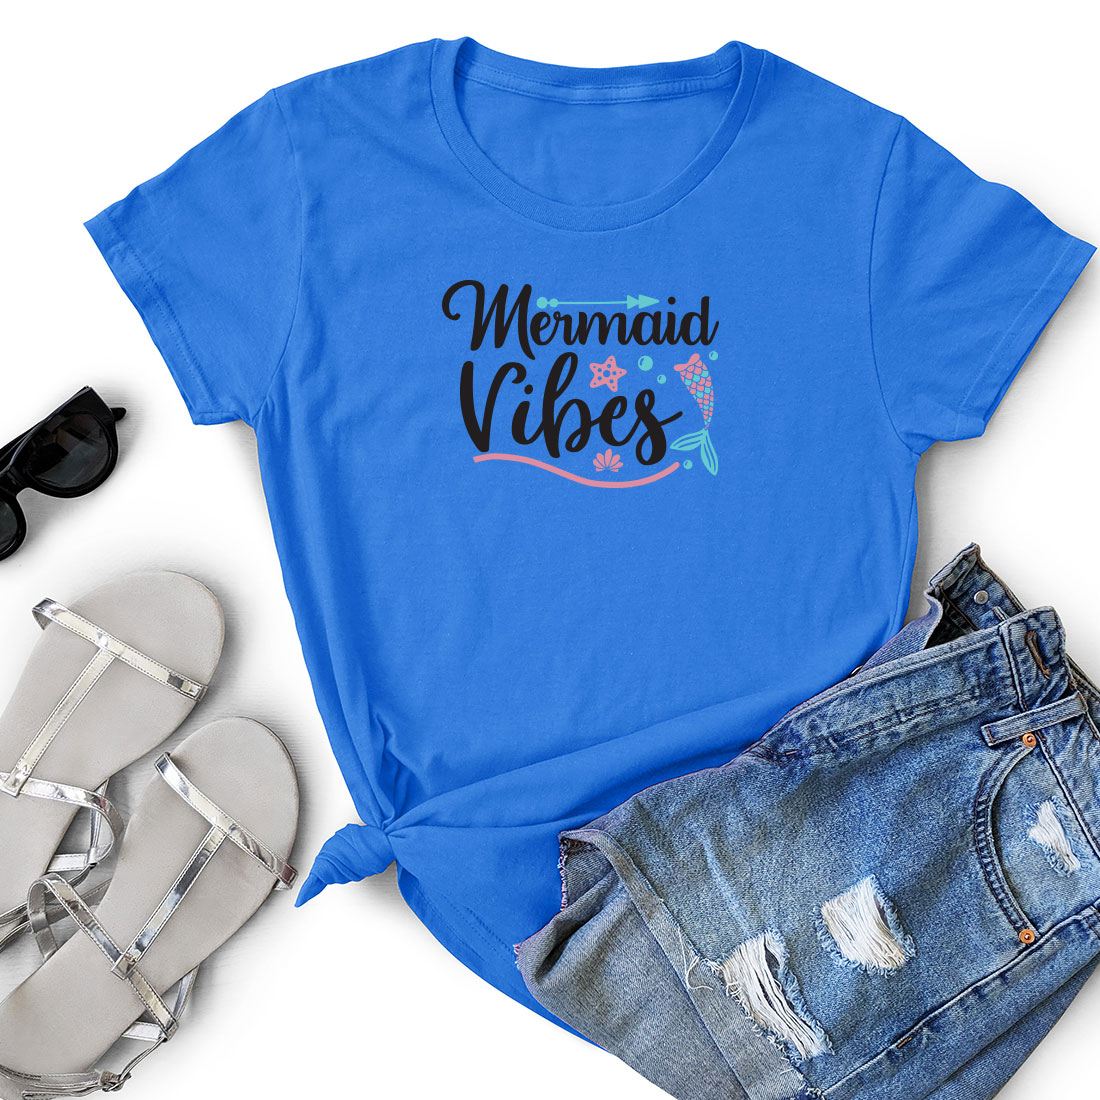 Blue shirt that says mermaid vibes next to a pair of shorts.